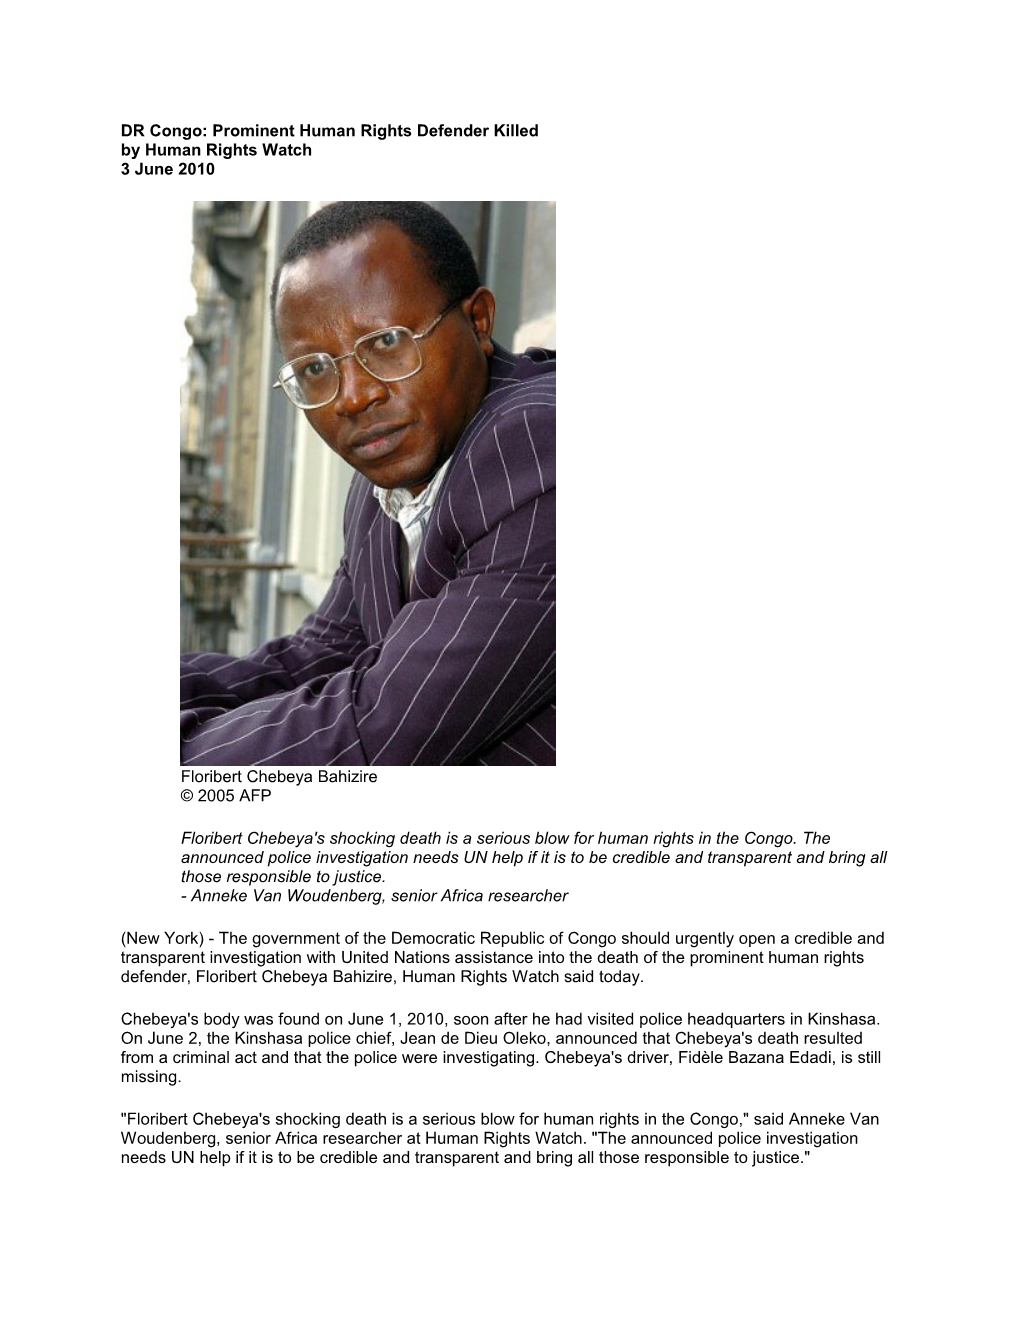 DR Congo: Prominent Human Rights Defender Killed by Human Rights Watch 3 June 2010